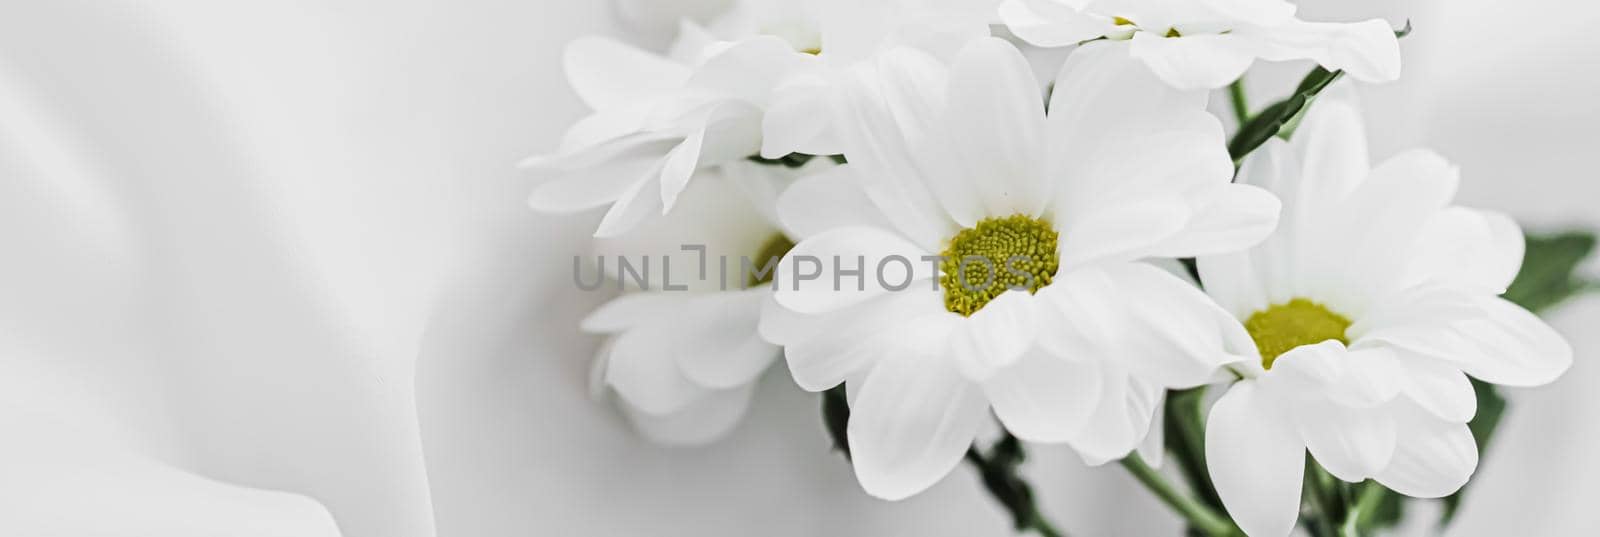 White daisy flowers on silk fabric as bridal flatlay background, wedding invitation and holiday branding, flat lay design by Anneleven